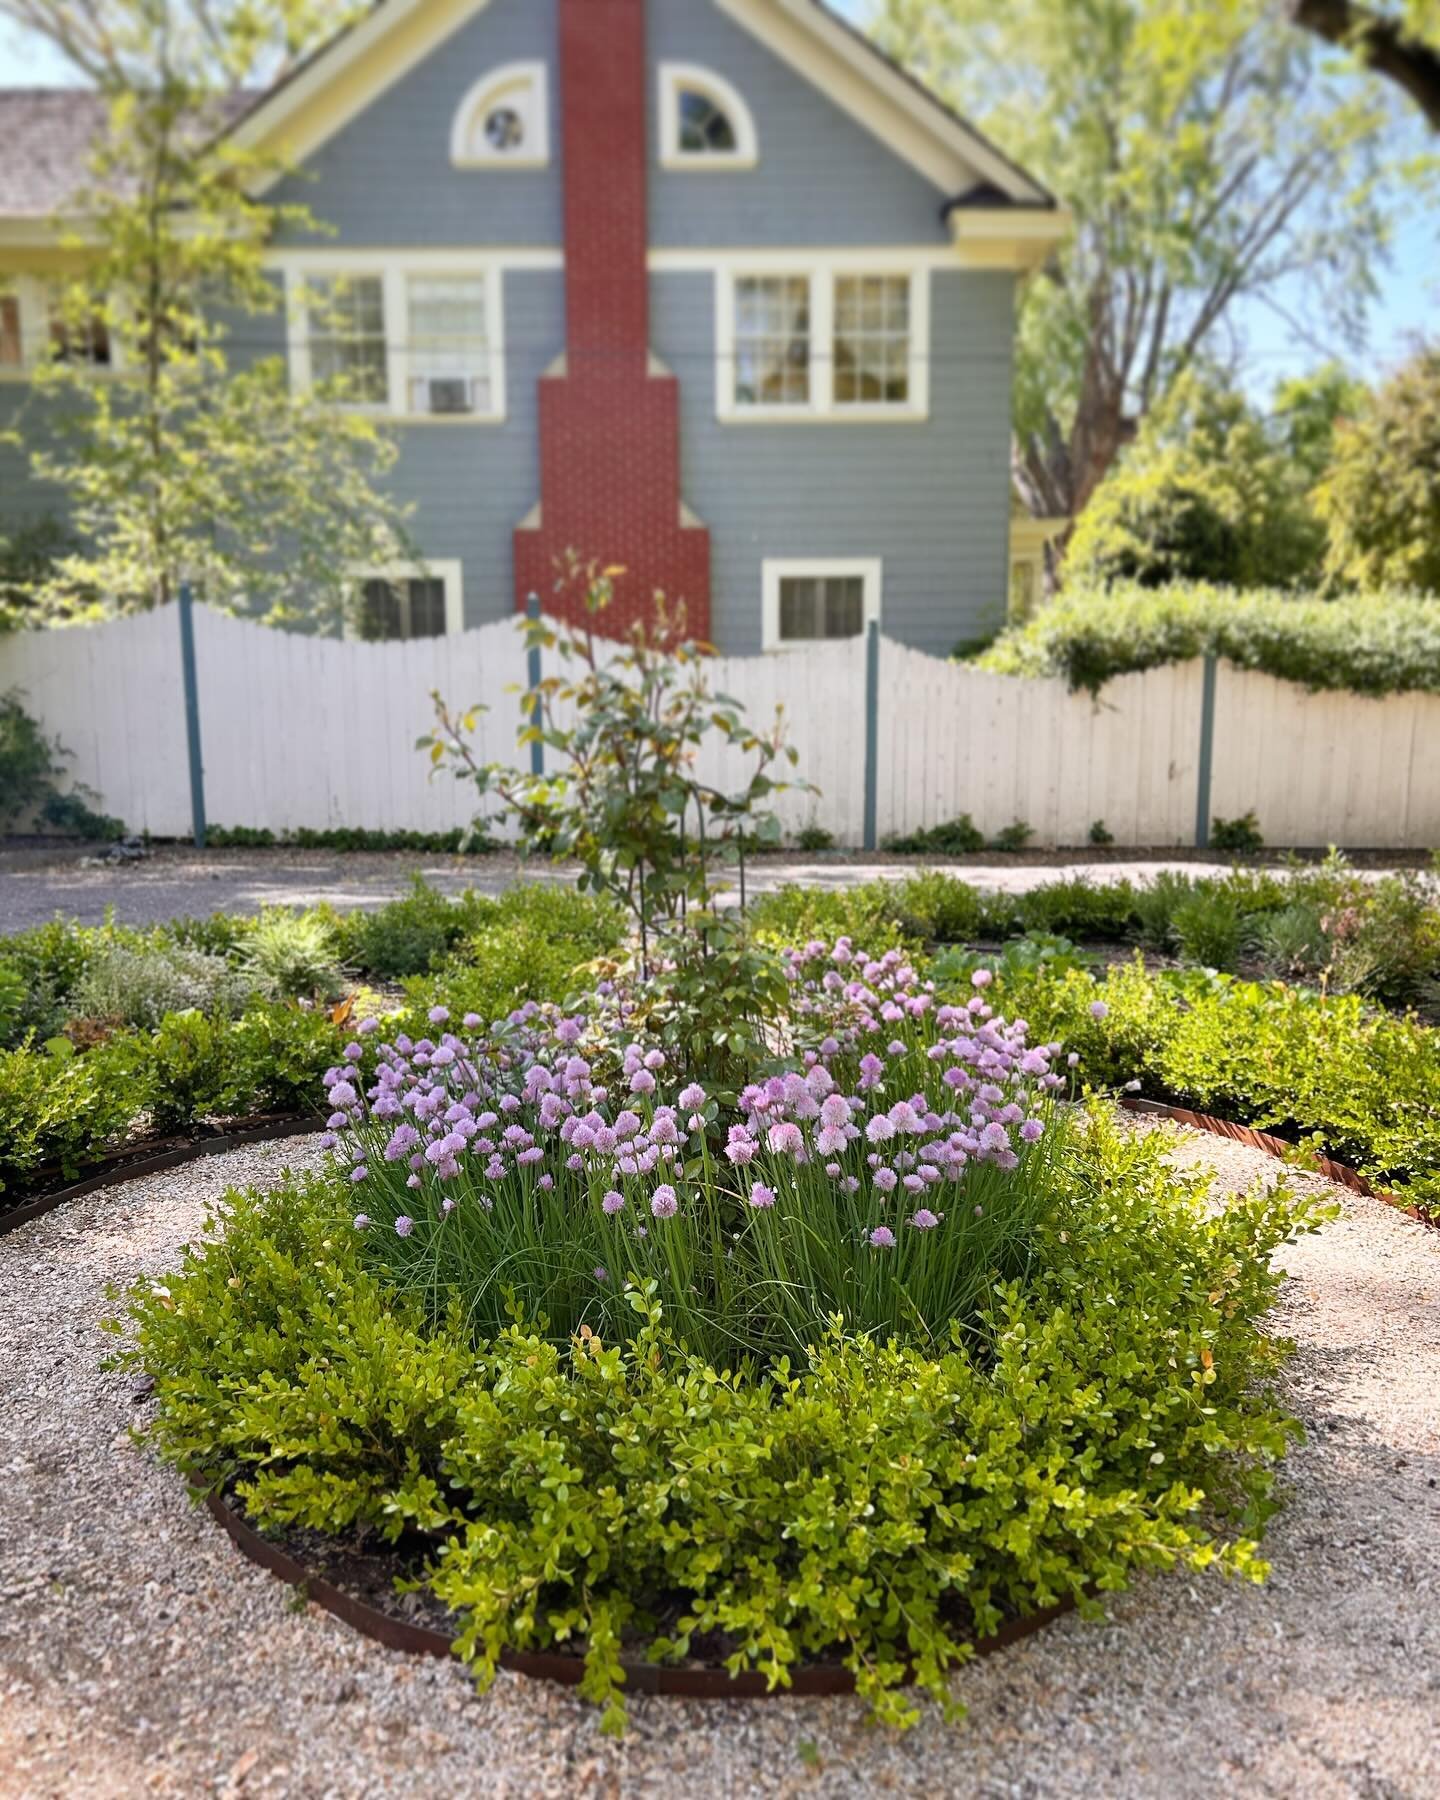 When doing research for this formal perennial and vegetable garden, I came across @terrywinters9141 and was so inspired and excited to combine chives and boxwood like Terry did. Thank you for the inspiration! #formalgarden #gardendesign #ediblelandsc